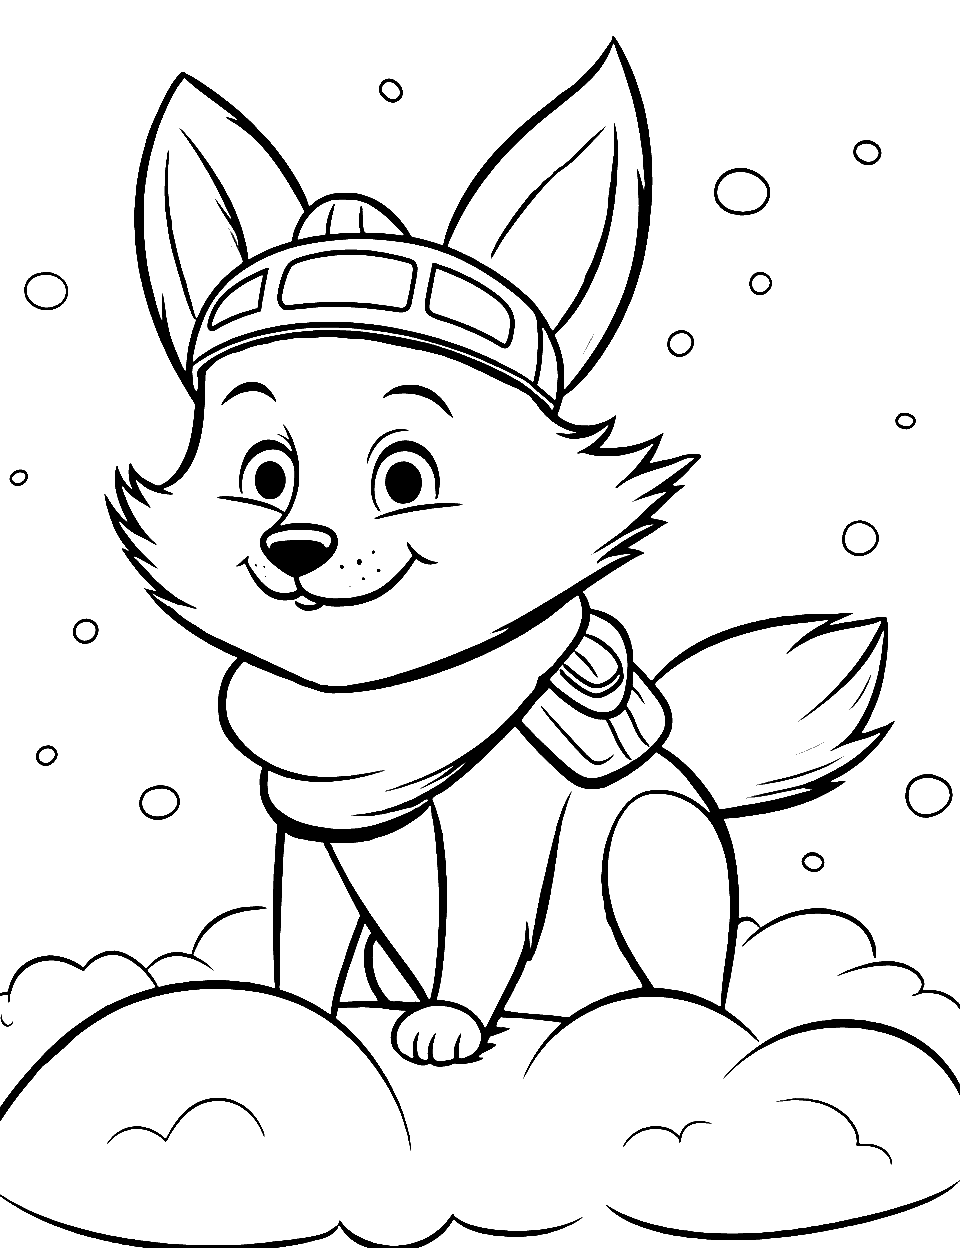 Fox Pilot in the Sky Coloring Page - A fox pilot with fluffy clouds around.